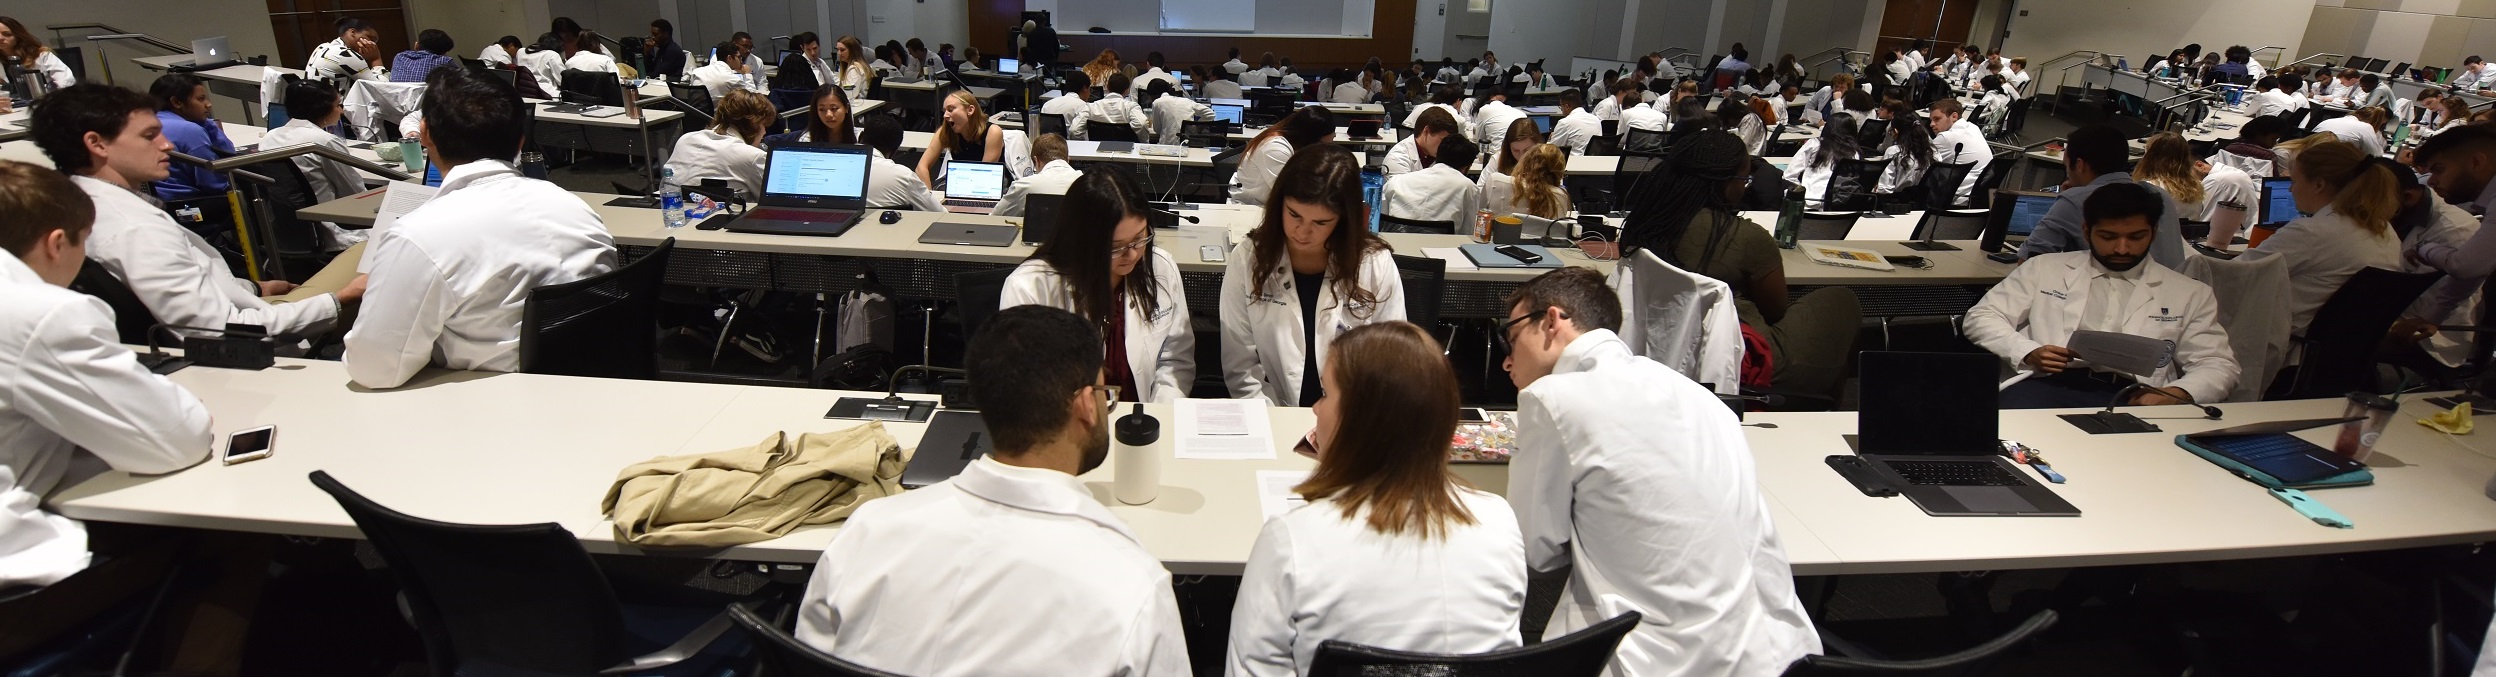 Medical students in the classroom 